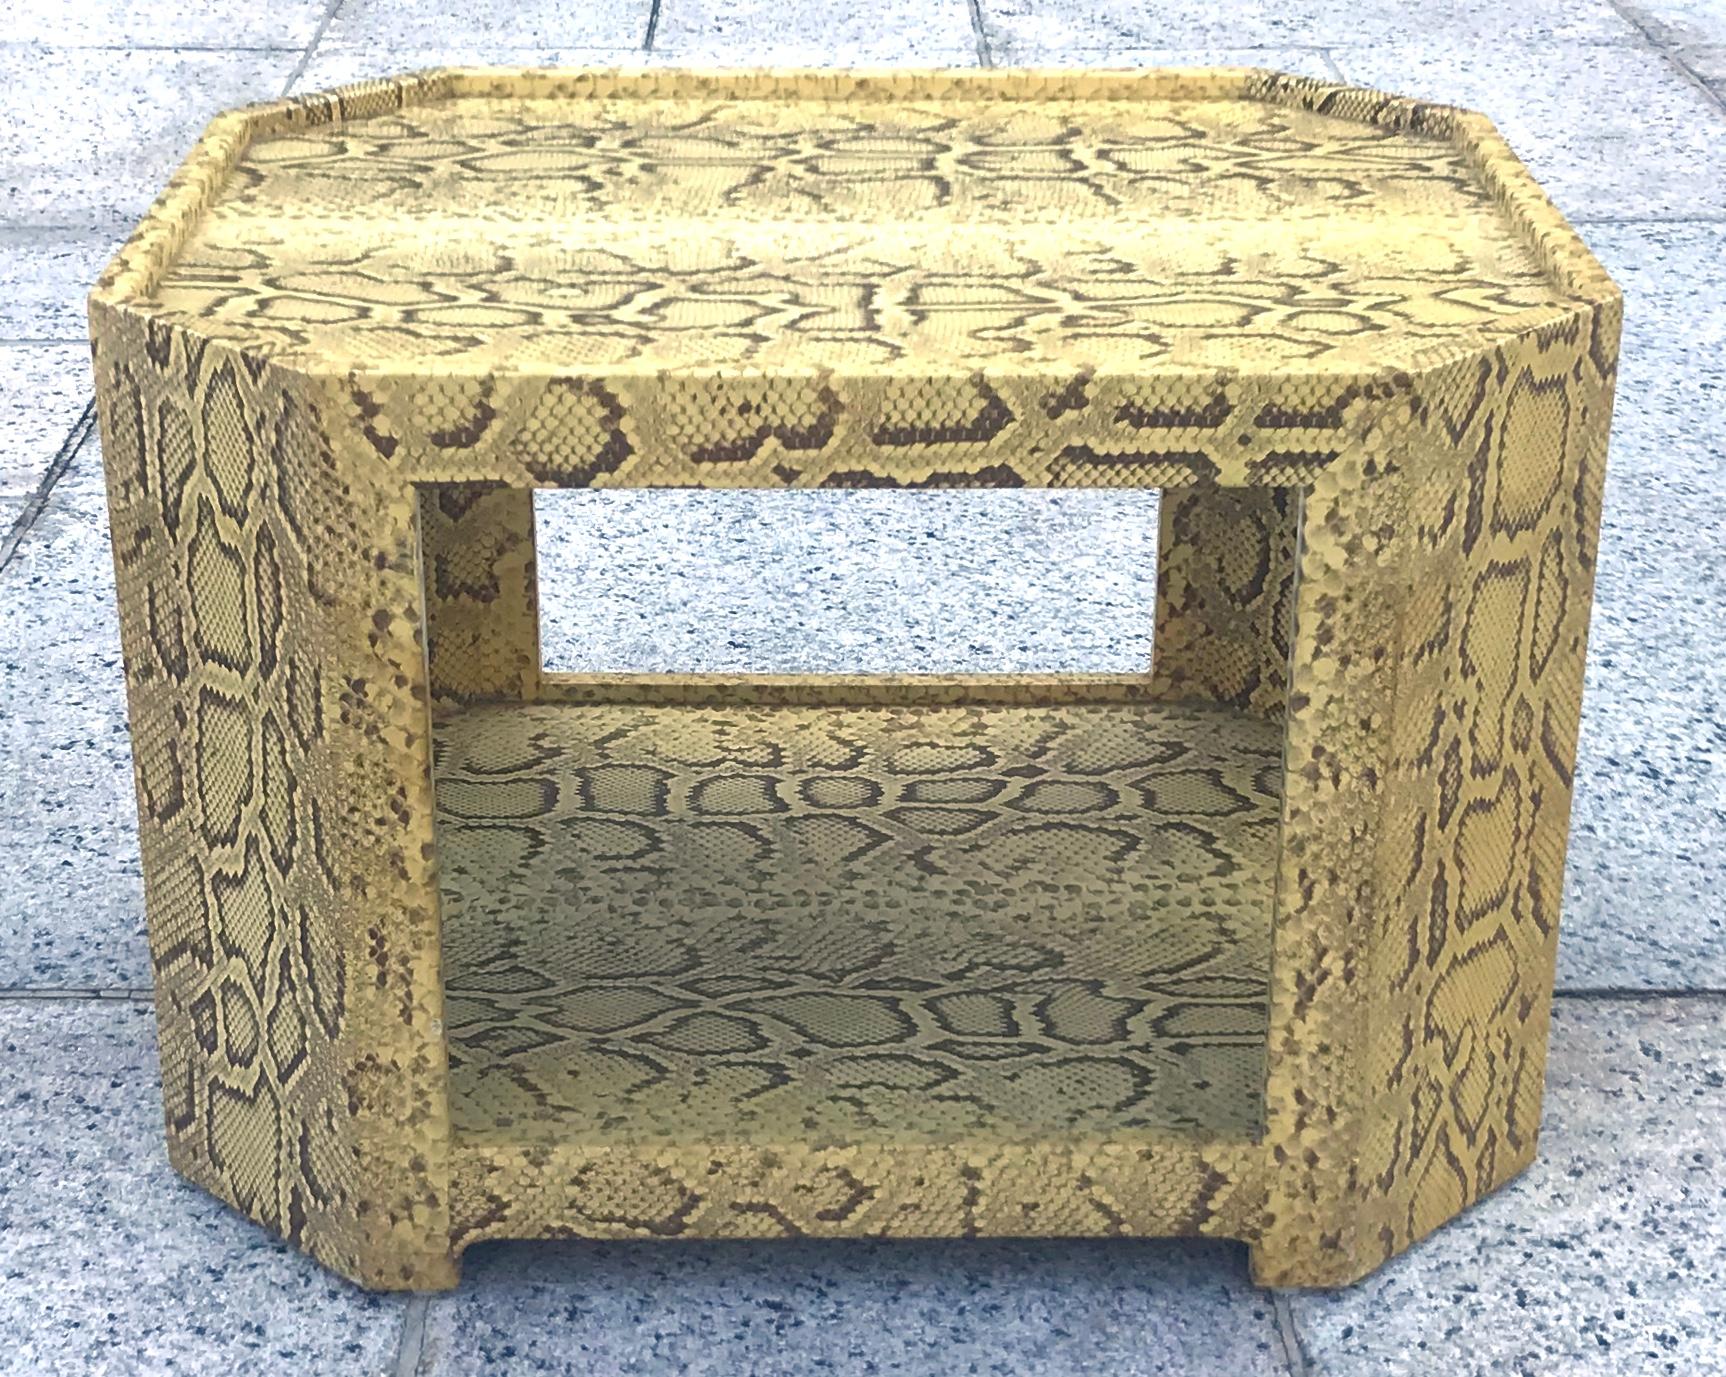 Exceptional and rare 1970s cocktail table or side table completely covered in natural python skin by noted master designer Karl Springer. The quality and craftsmanship are absolutely unparalleled on this piece, with the hides meticulously laid down